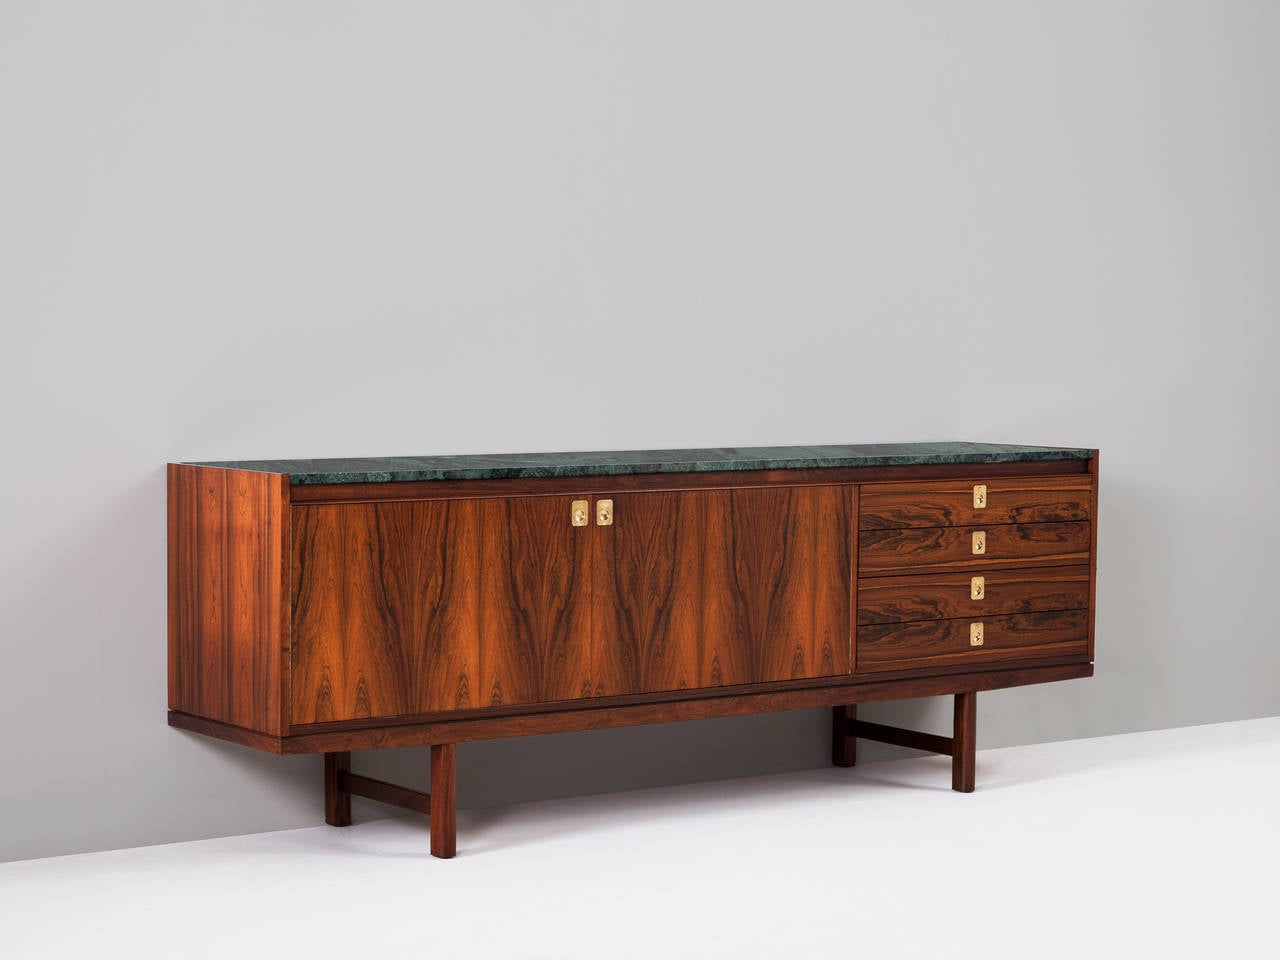 Very special rosewood sideboard designed by Robert Heritage with marble top is to be considered the most unique variant.

Equipped with four drawers accompanied with highly refined inlaid brass handles. This well designed sideboard has been